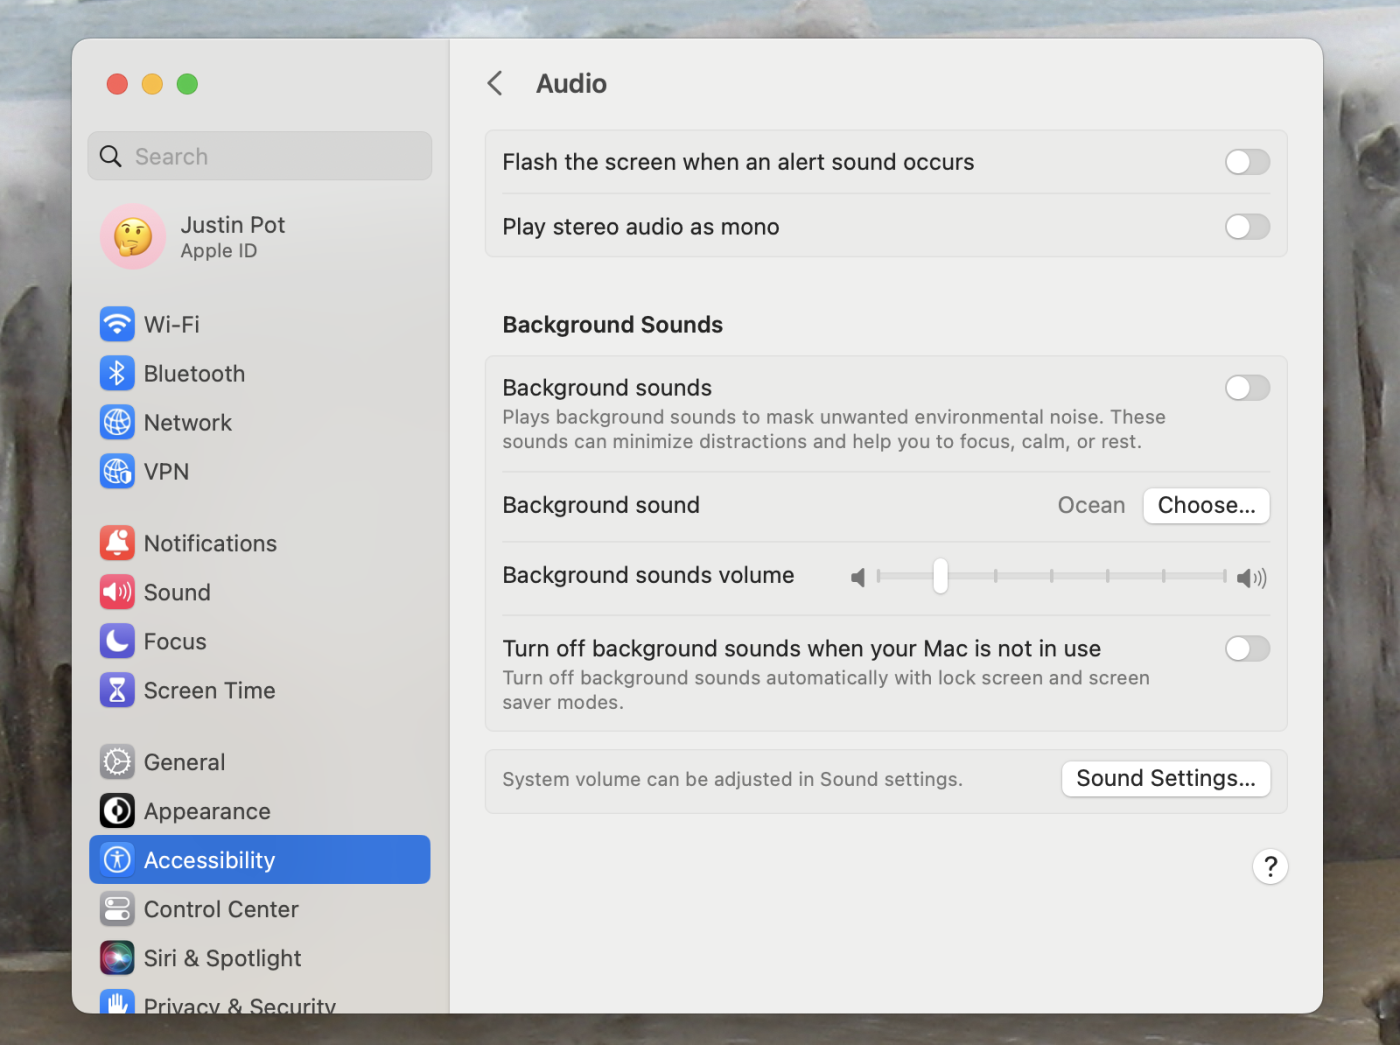 The background sounds settings on a Mac